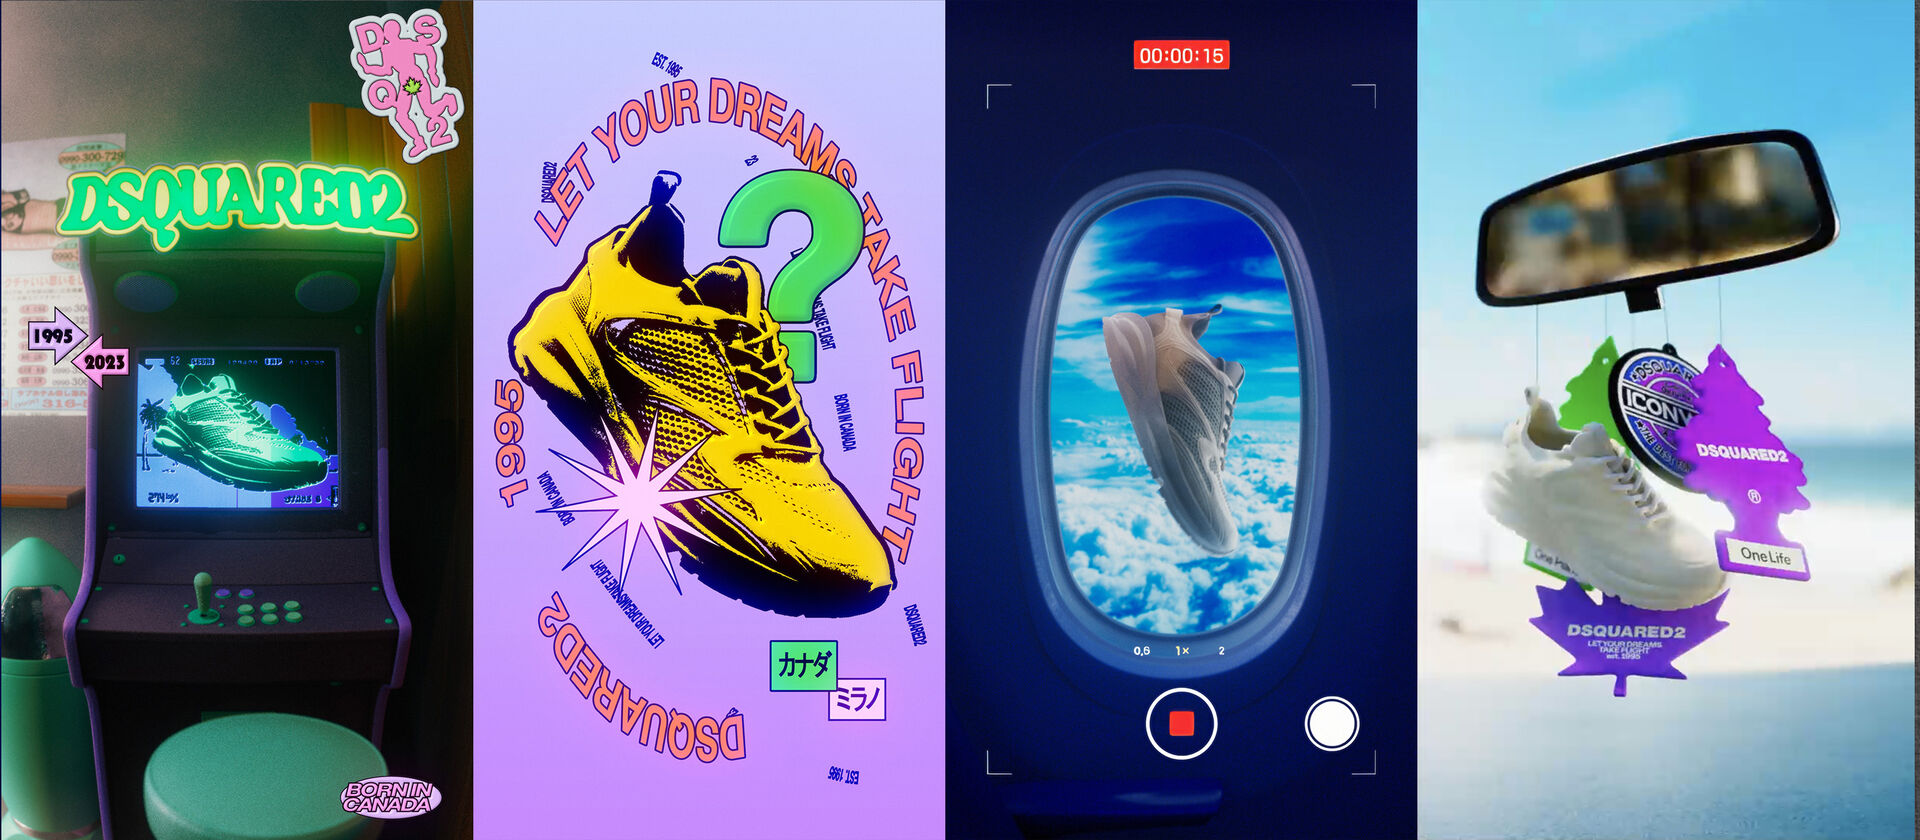 Different views of the new Dash sneaker from Dsquared2 with colorful backgrounds